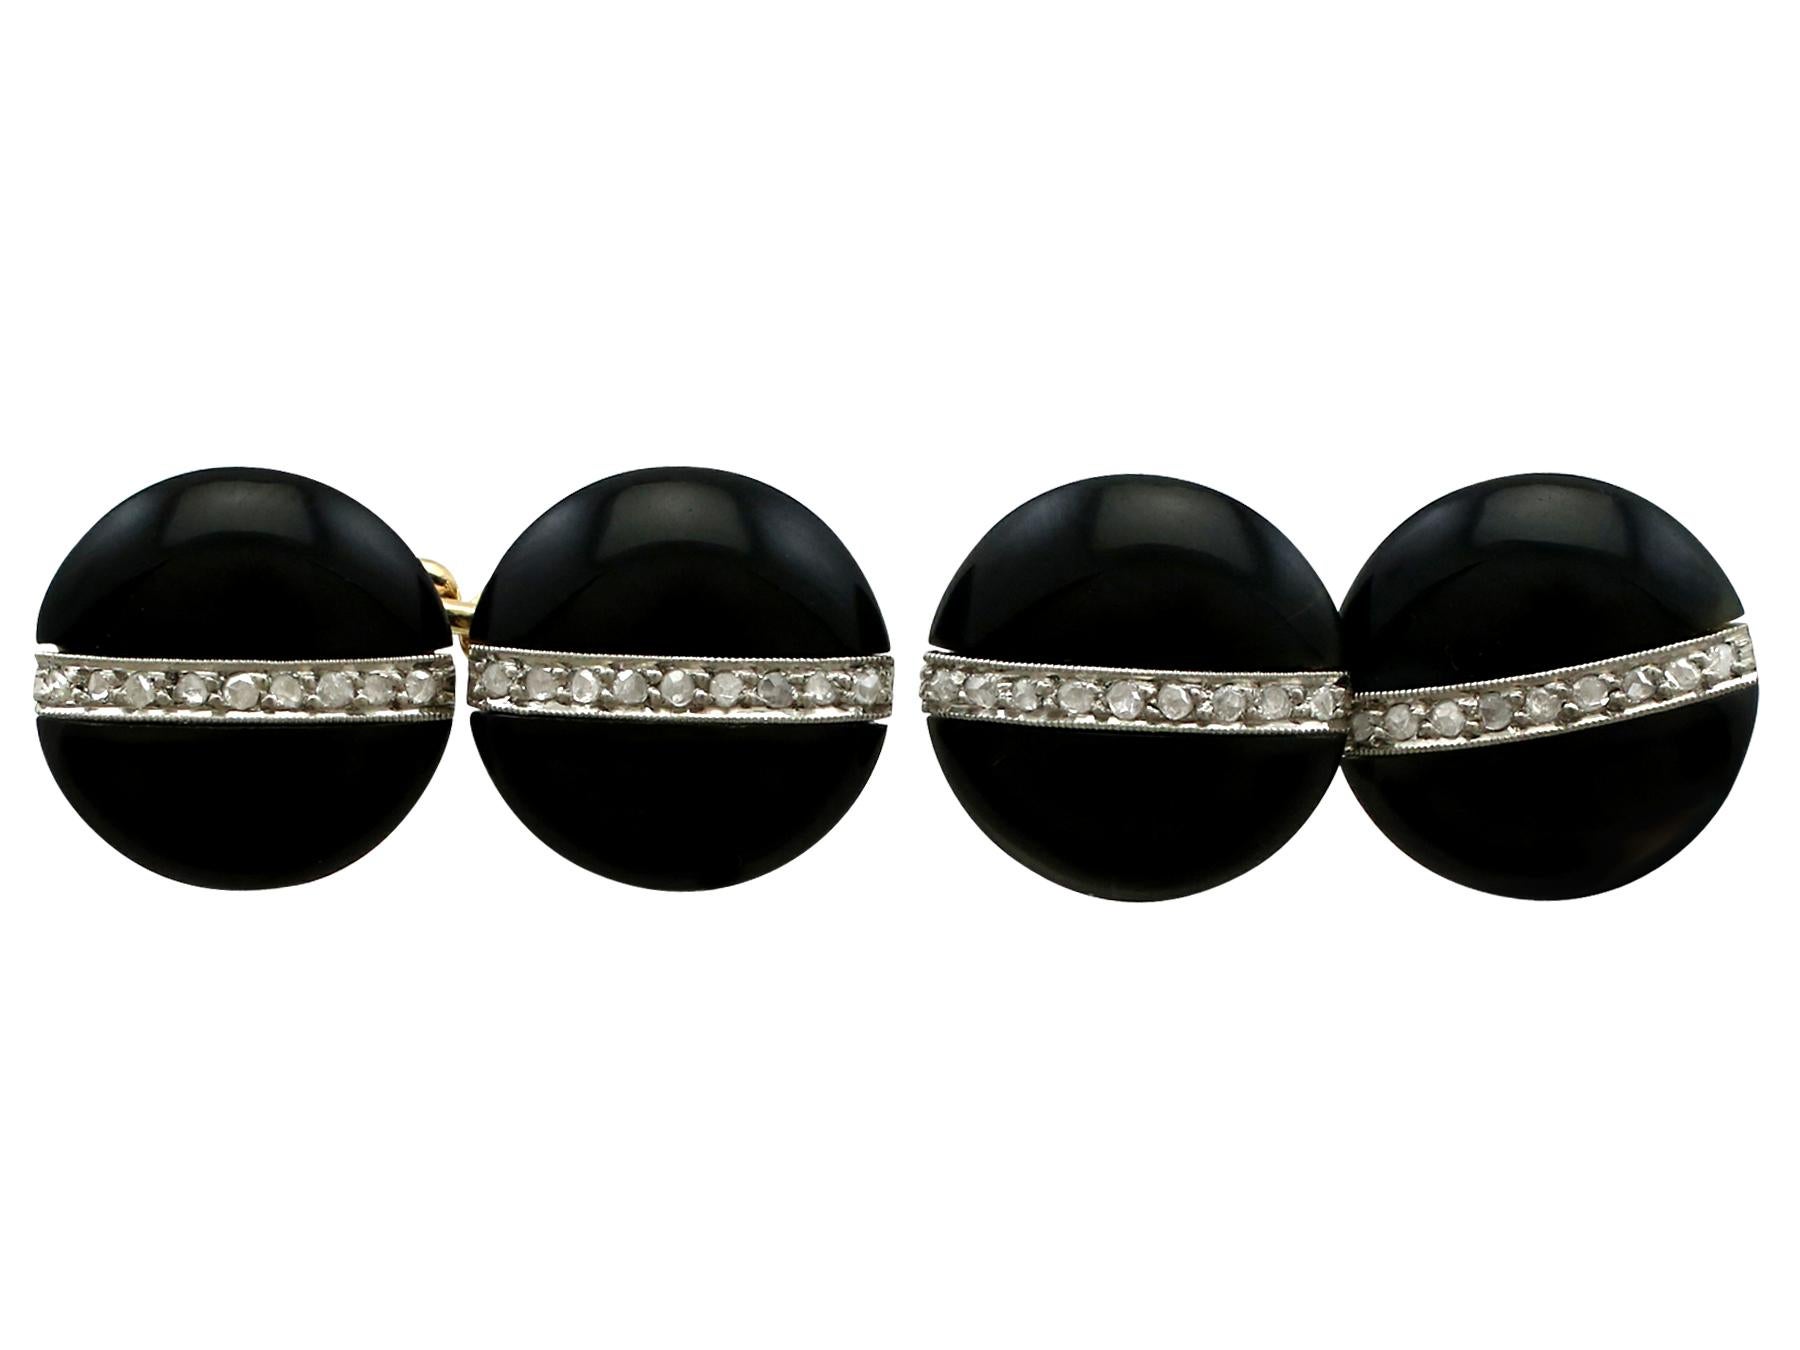 An impressive pair of Art Deco black onyx and 0.42 carat diamond, platinum and 18 karat yellow gold cufflinks; part of our diverse antique jewellery collections.

These fine and impressive rounded onyx and diamond cufflinks have been crafted in